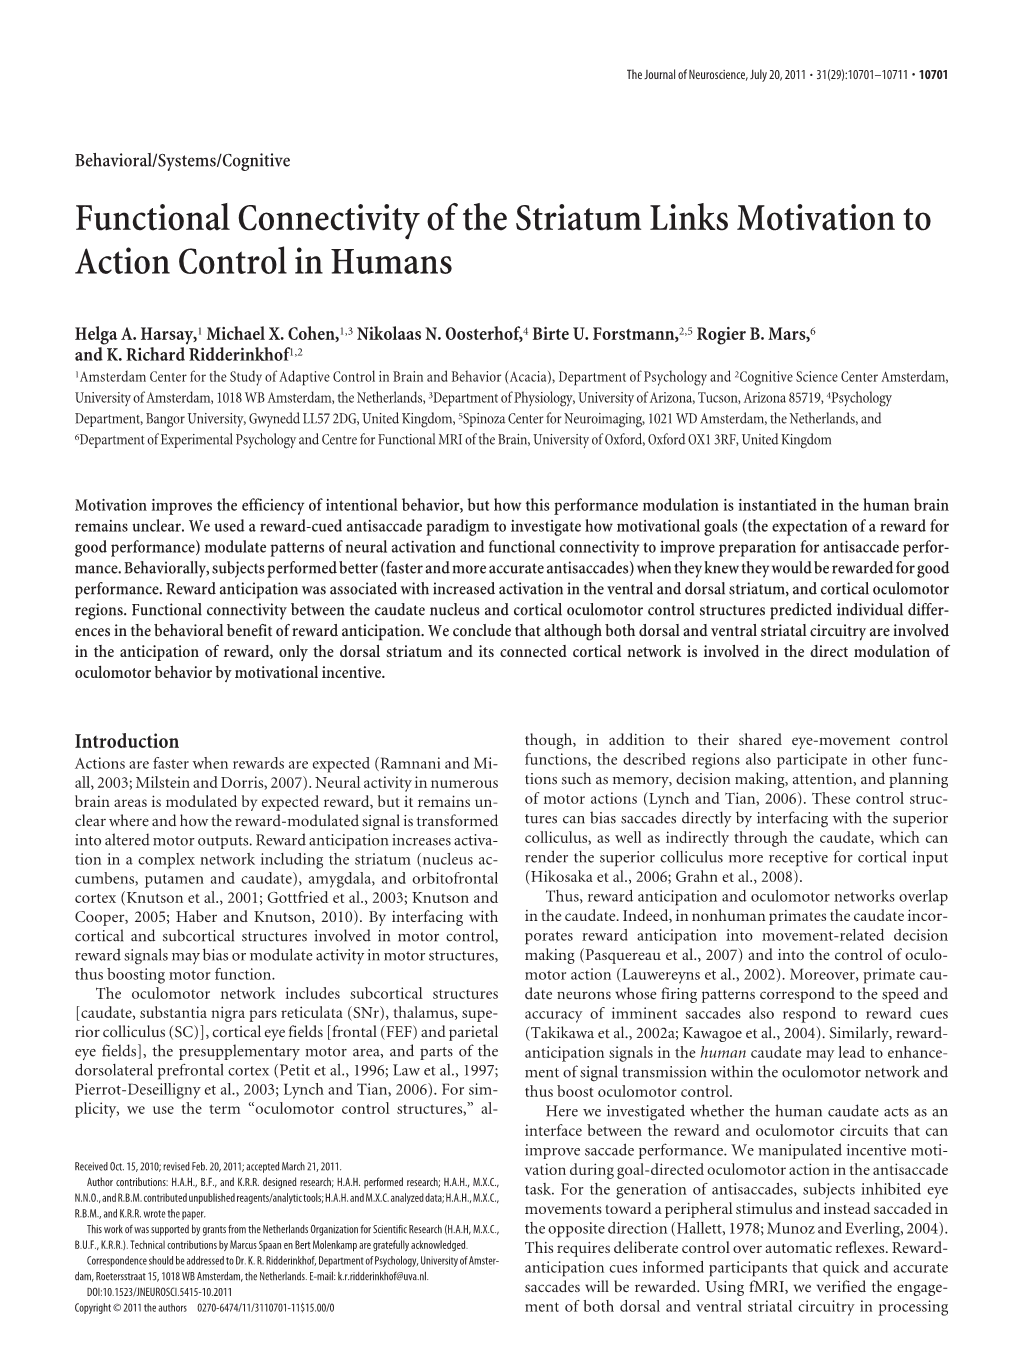 Functional Connectivity of the Striatum Links Motivation to Action Control in Humans